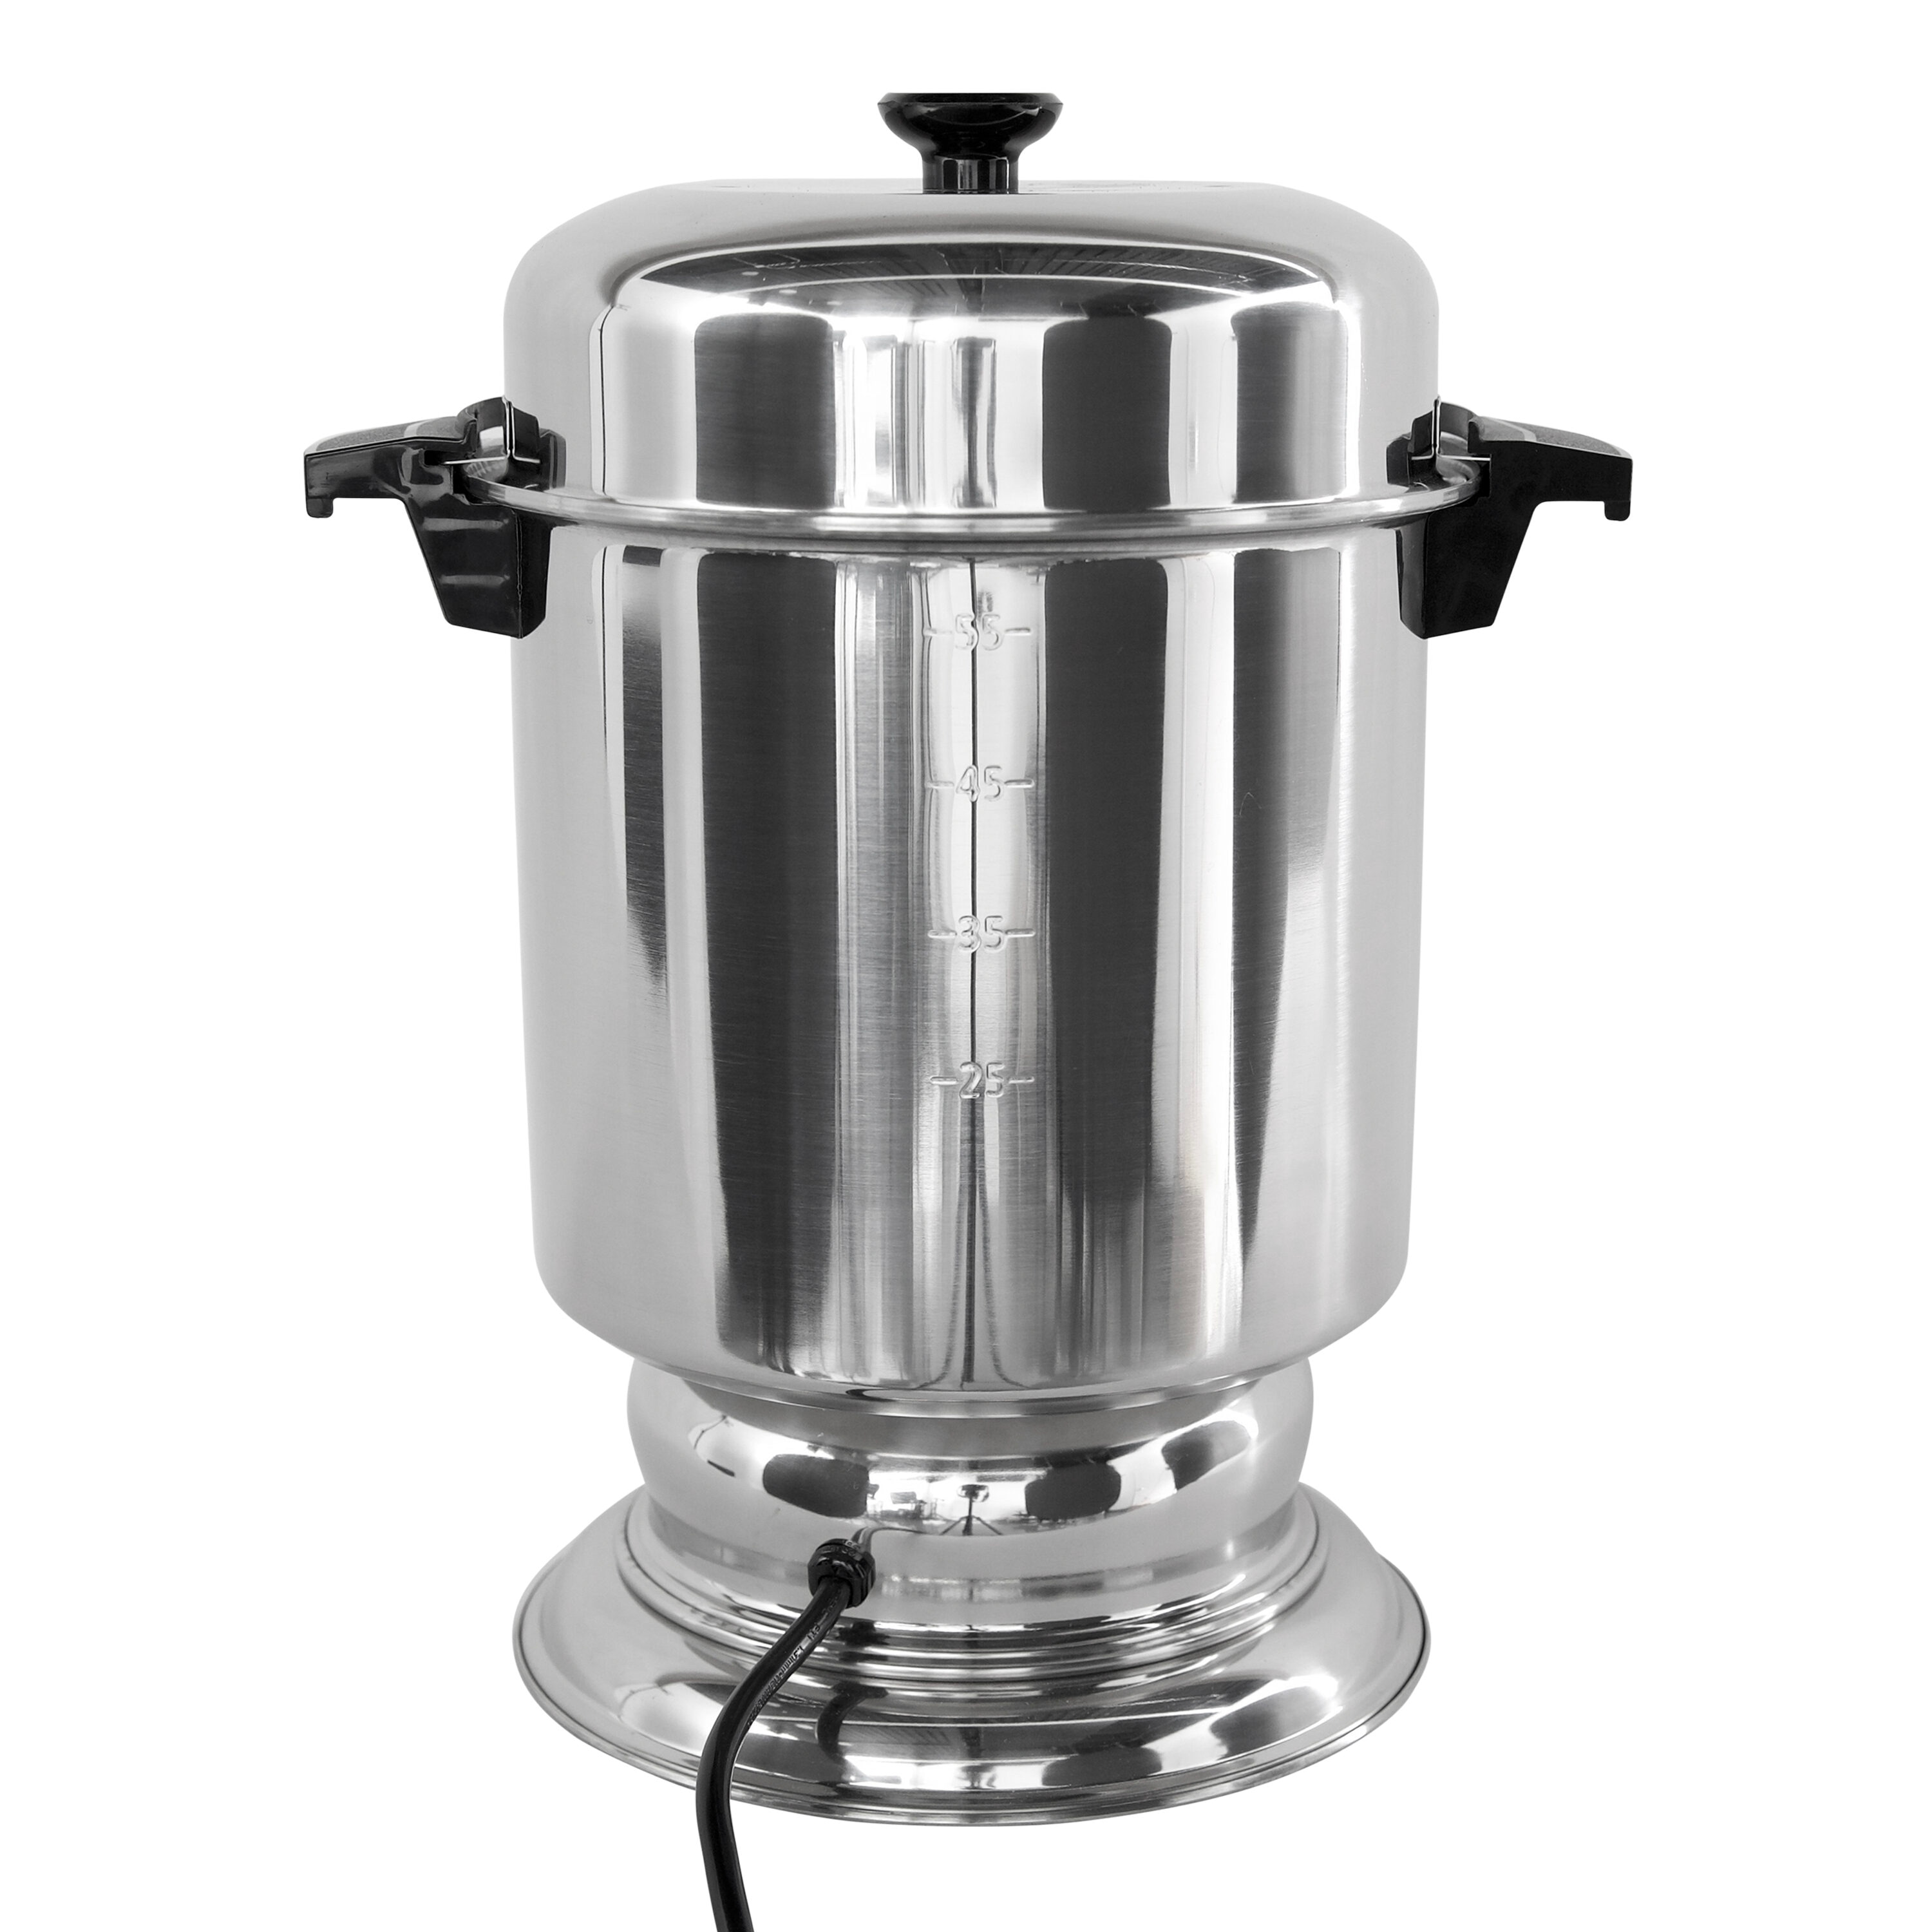 West Bend 13550 Coffee Urn Commercial Polished Stainless Steel Features  Automatic Temperature Control Large Capacity with Fast Brewing and Easy  Clean